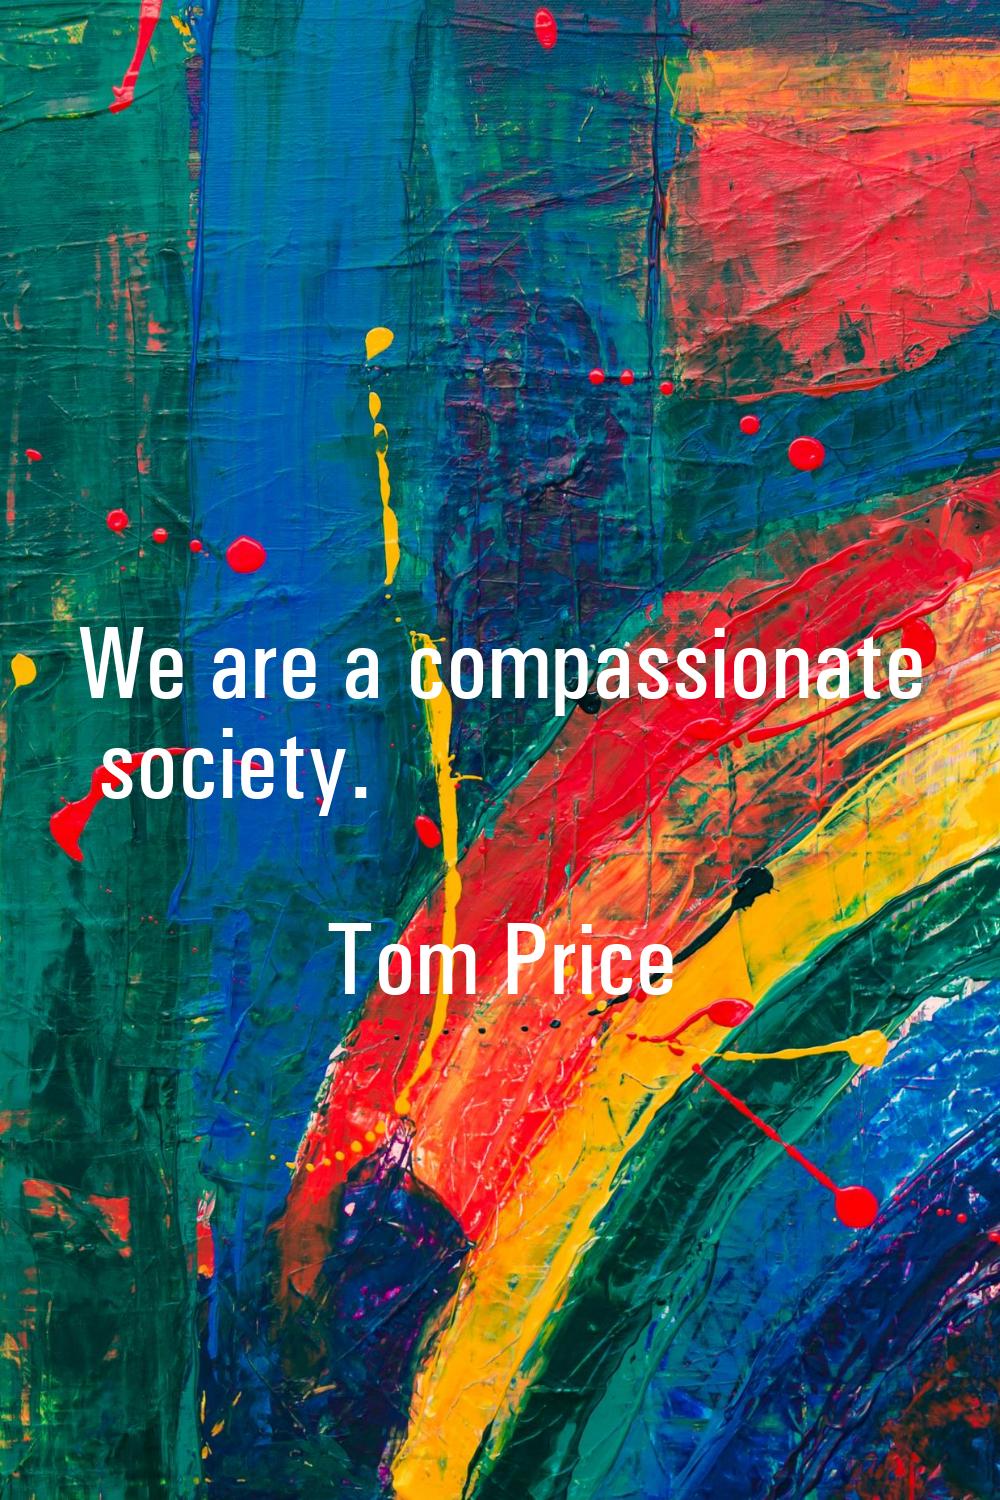 We are a compassionate society.